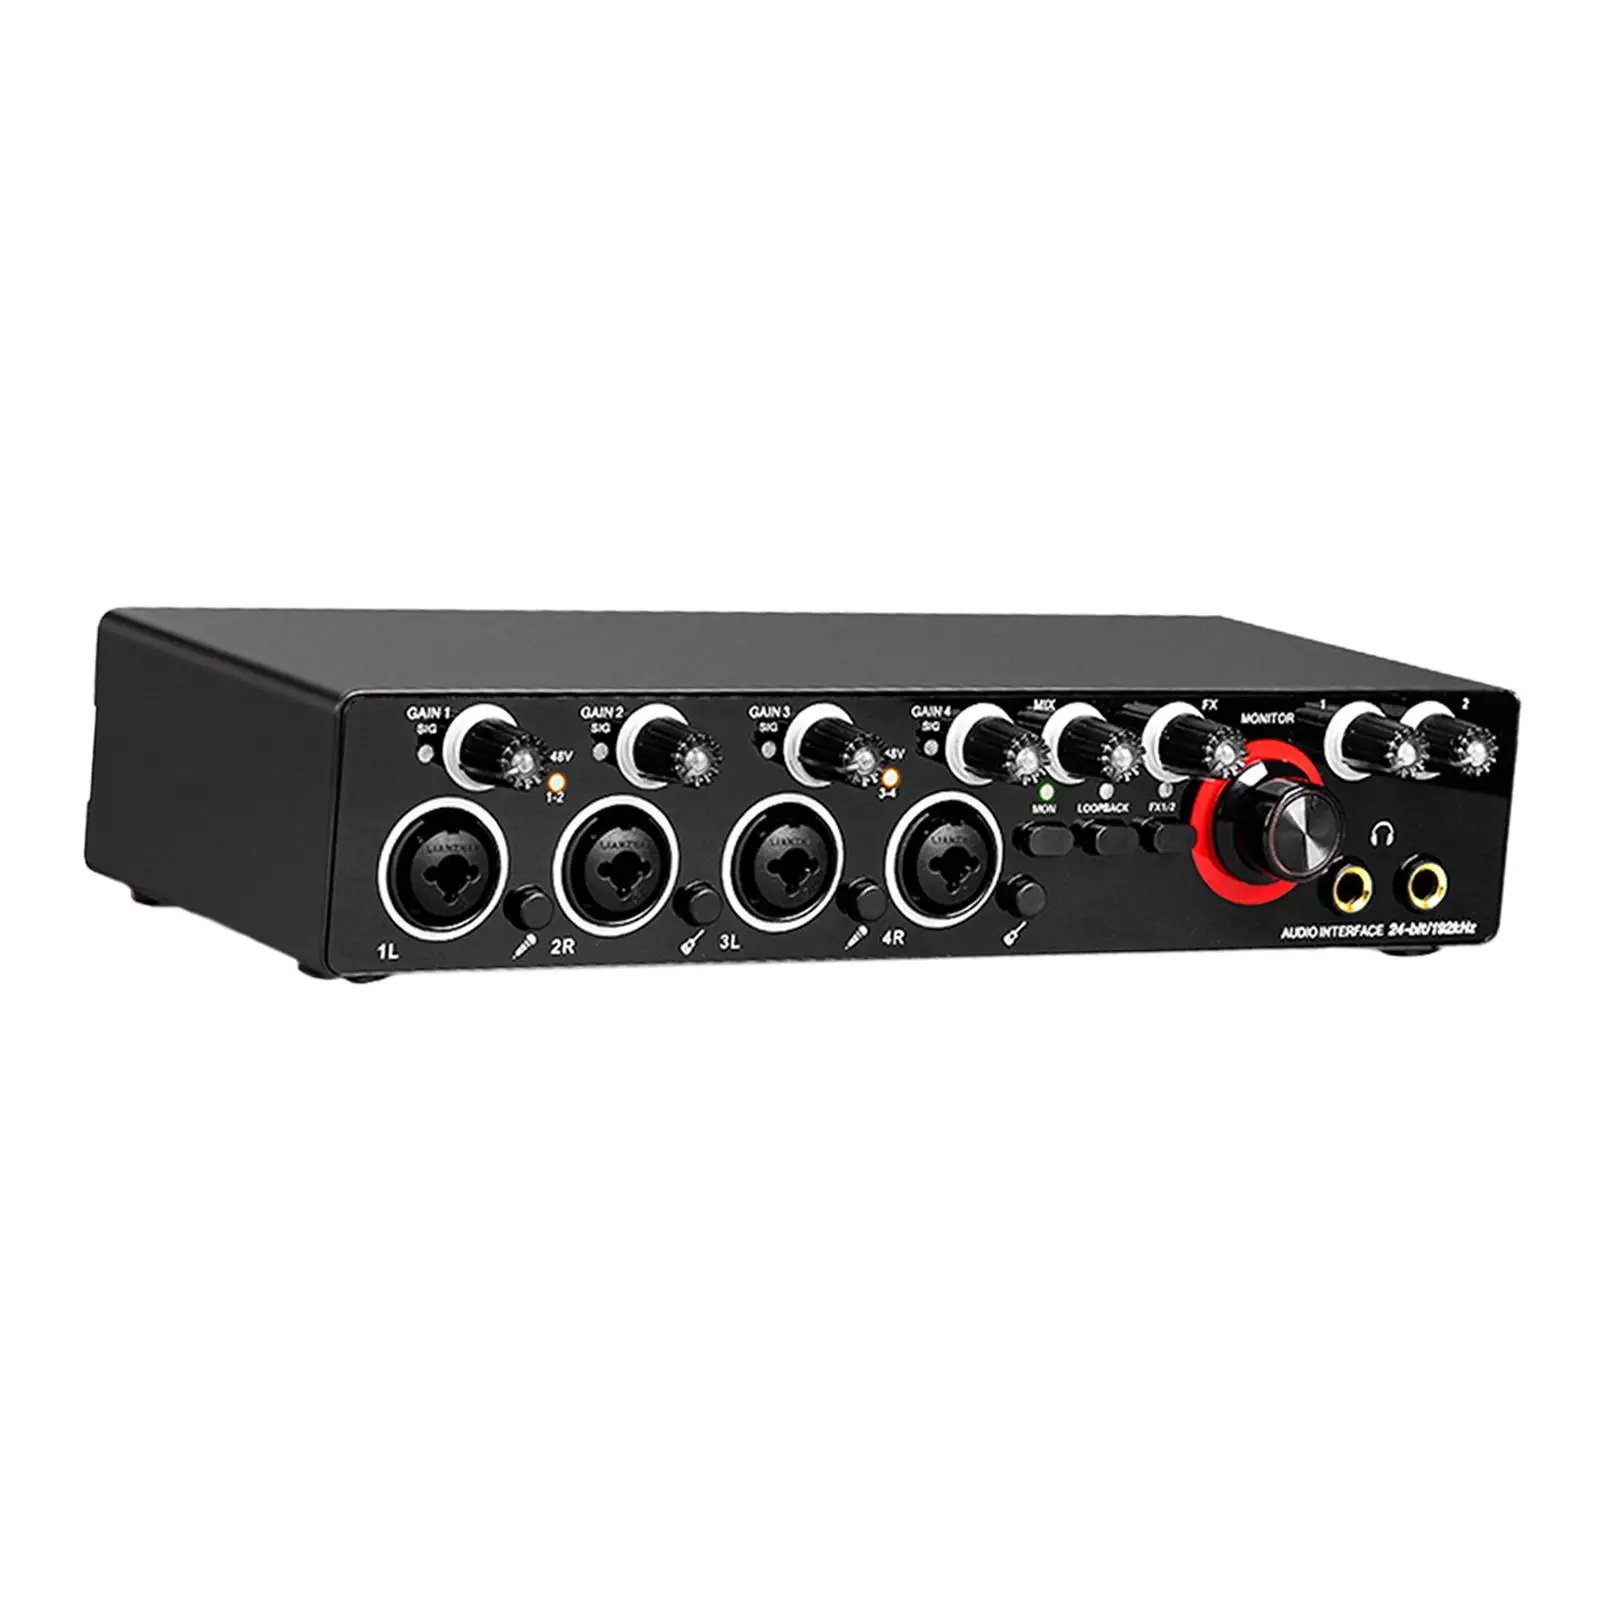 External Sound Card Audio Equipment 4 Way USB Audio Interface for Recording Music K Songs Live Streaming Gaming Voice Chatting